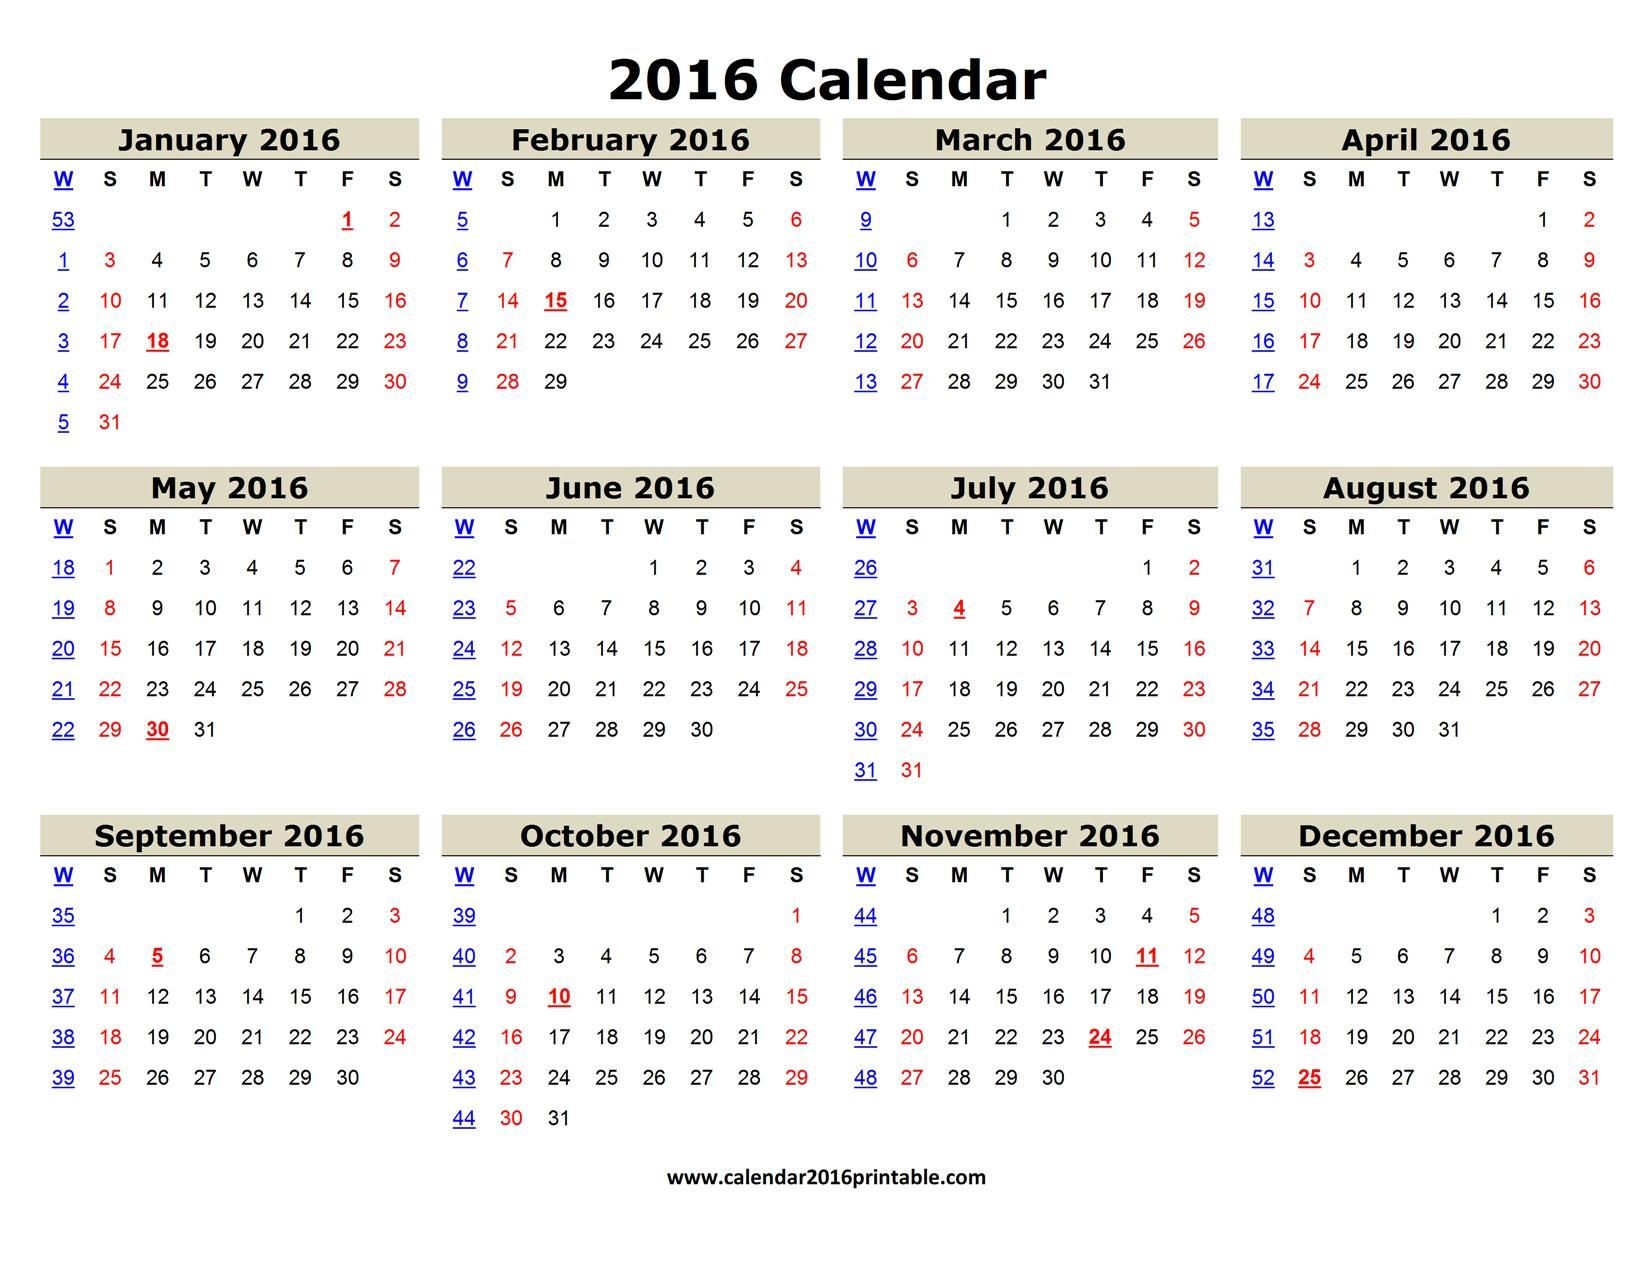 Free 2016 Calendar Printable One Page That You Can Download Microsoft